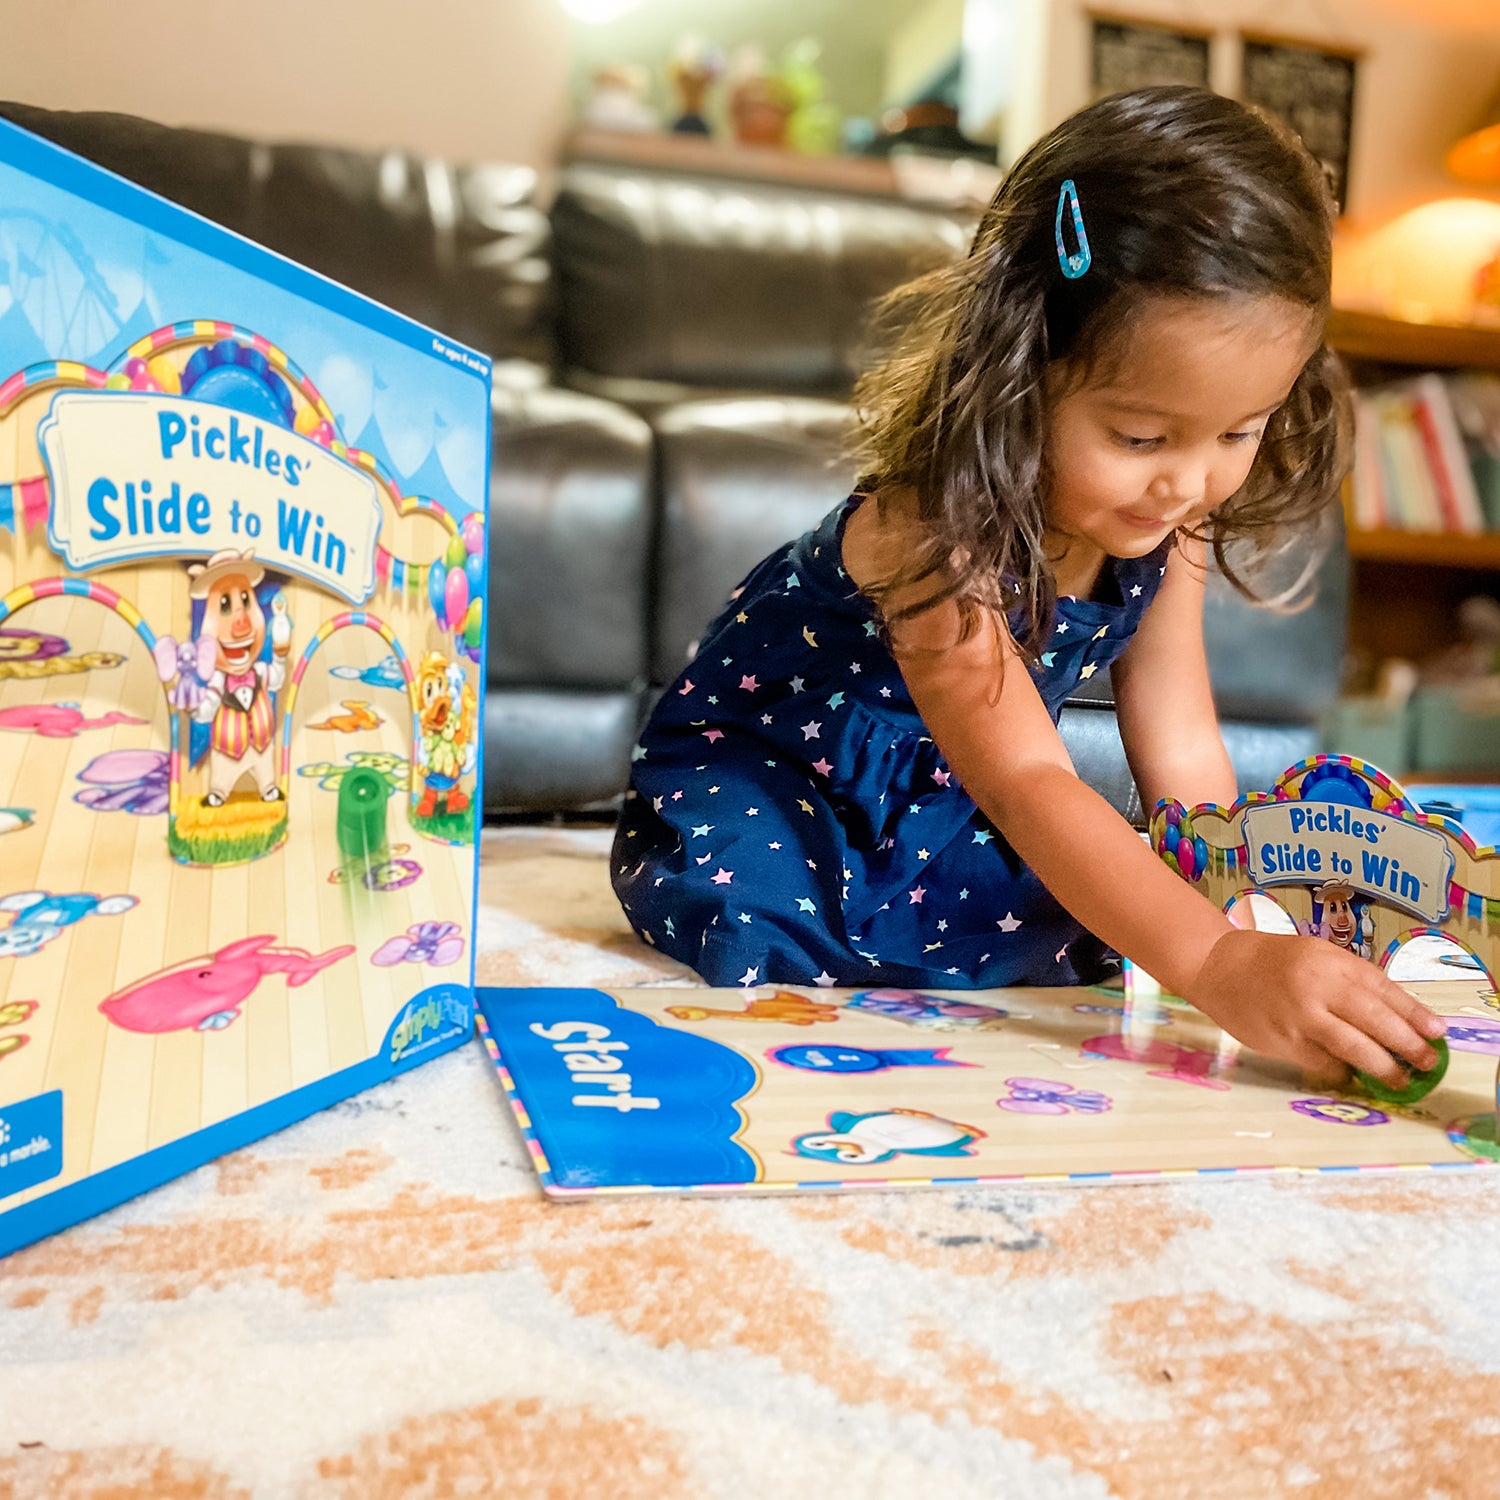 Pickles' Slide to Win by SimplyFun is an eye-hand coordinaion game which teaches taking turns for ages 4 and up.